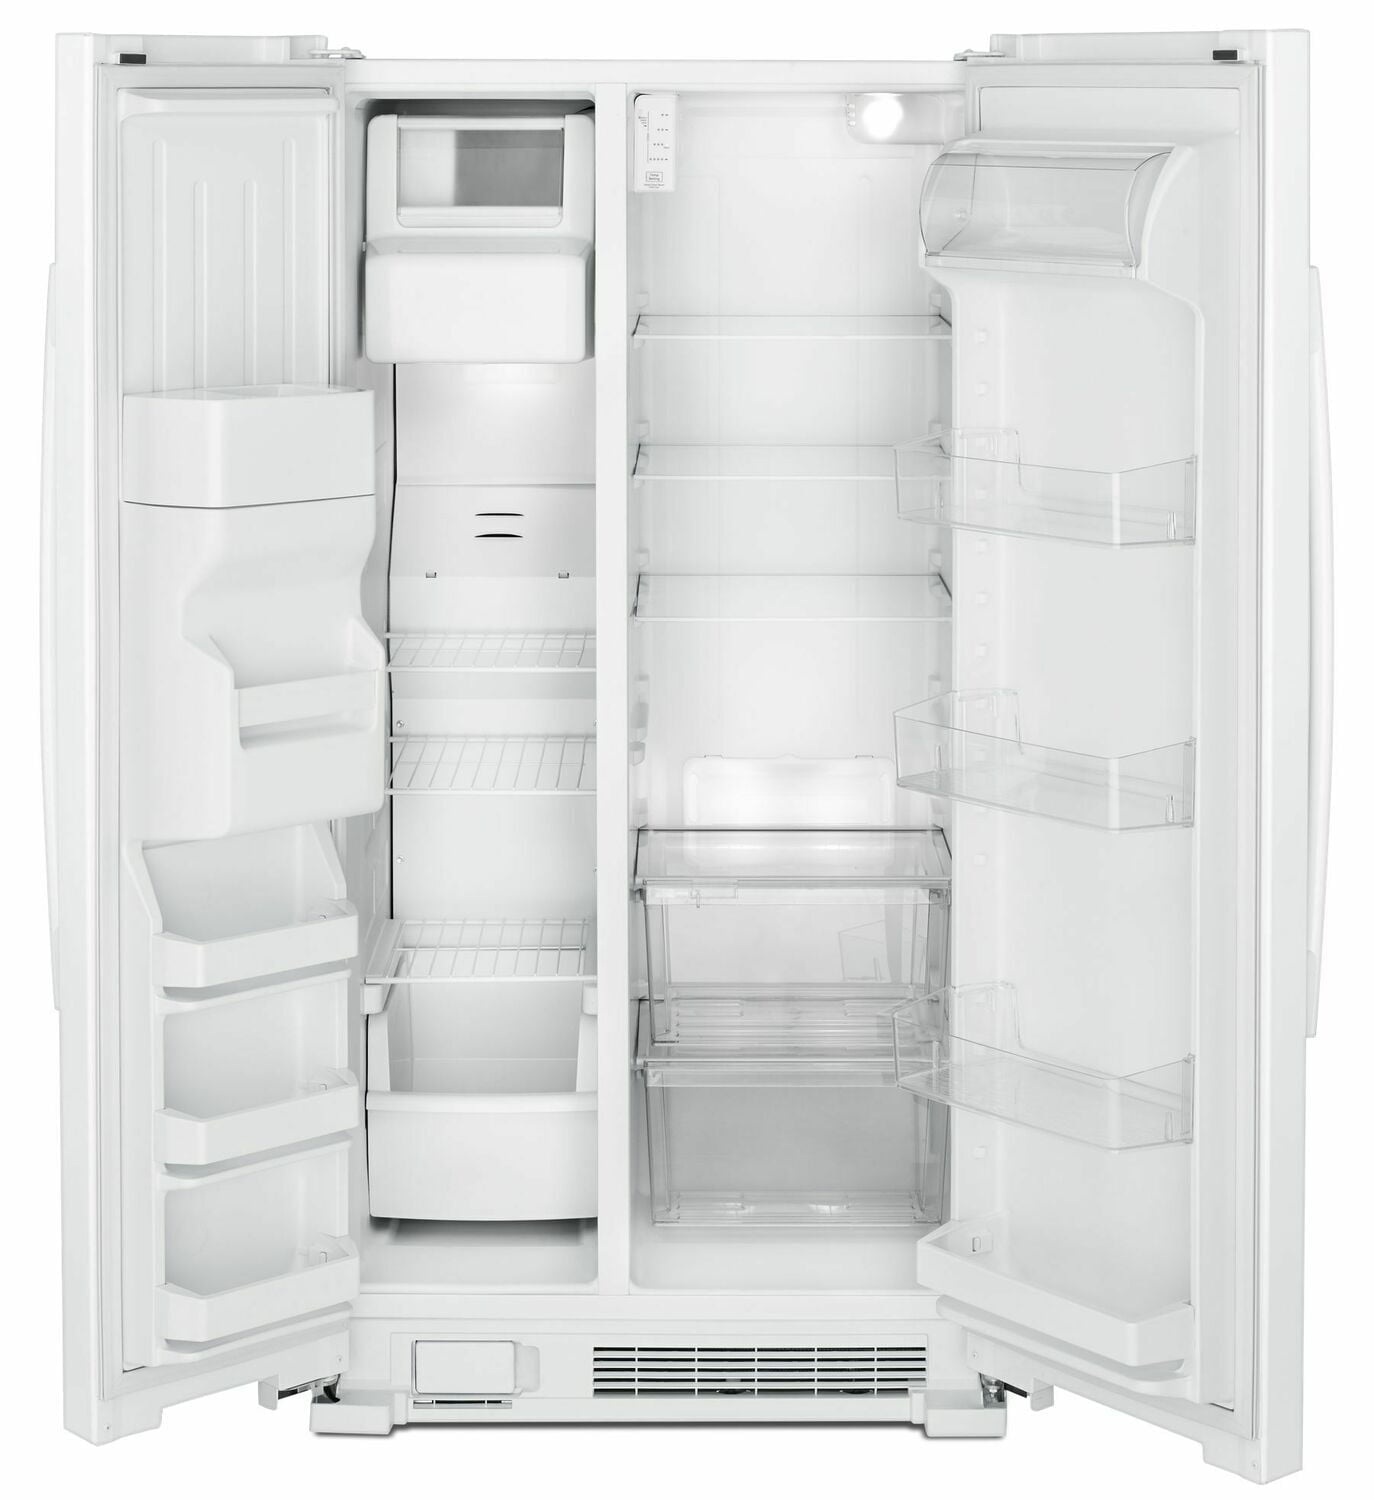 Amana ASI2175GRW 33-Inch Side-By-Side Refrigerator With Dual Pad External Ice And Water Dispenser - White